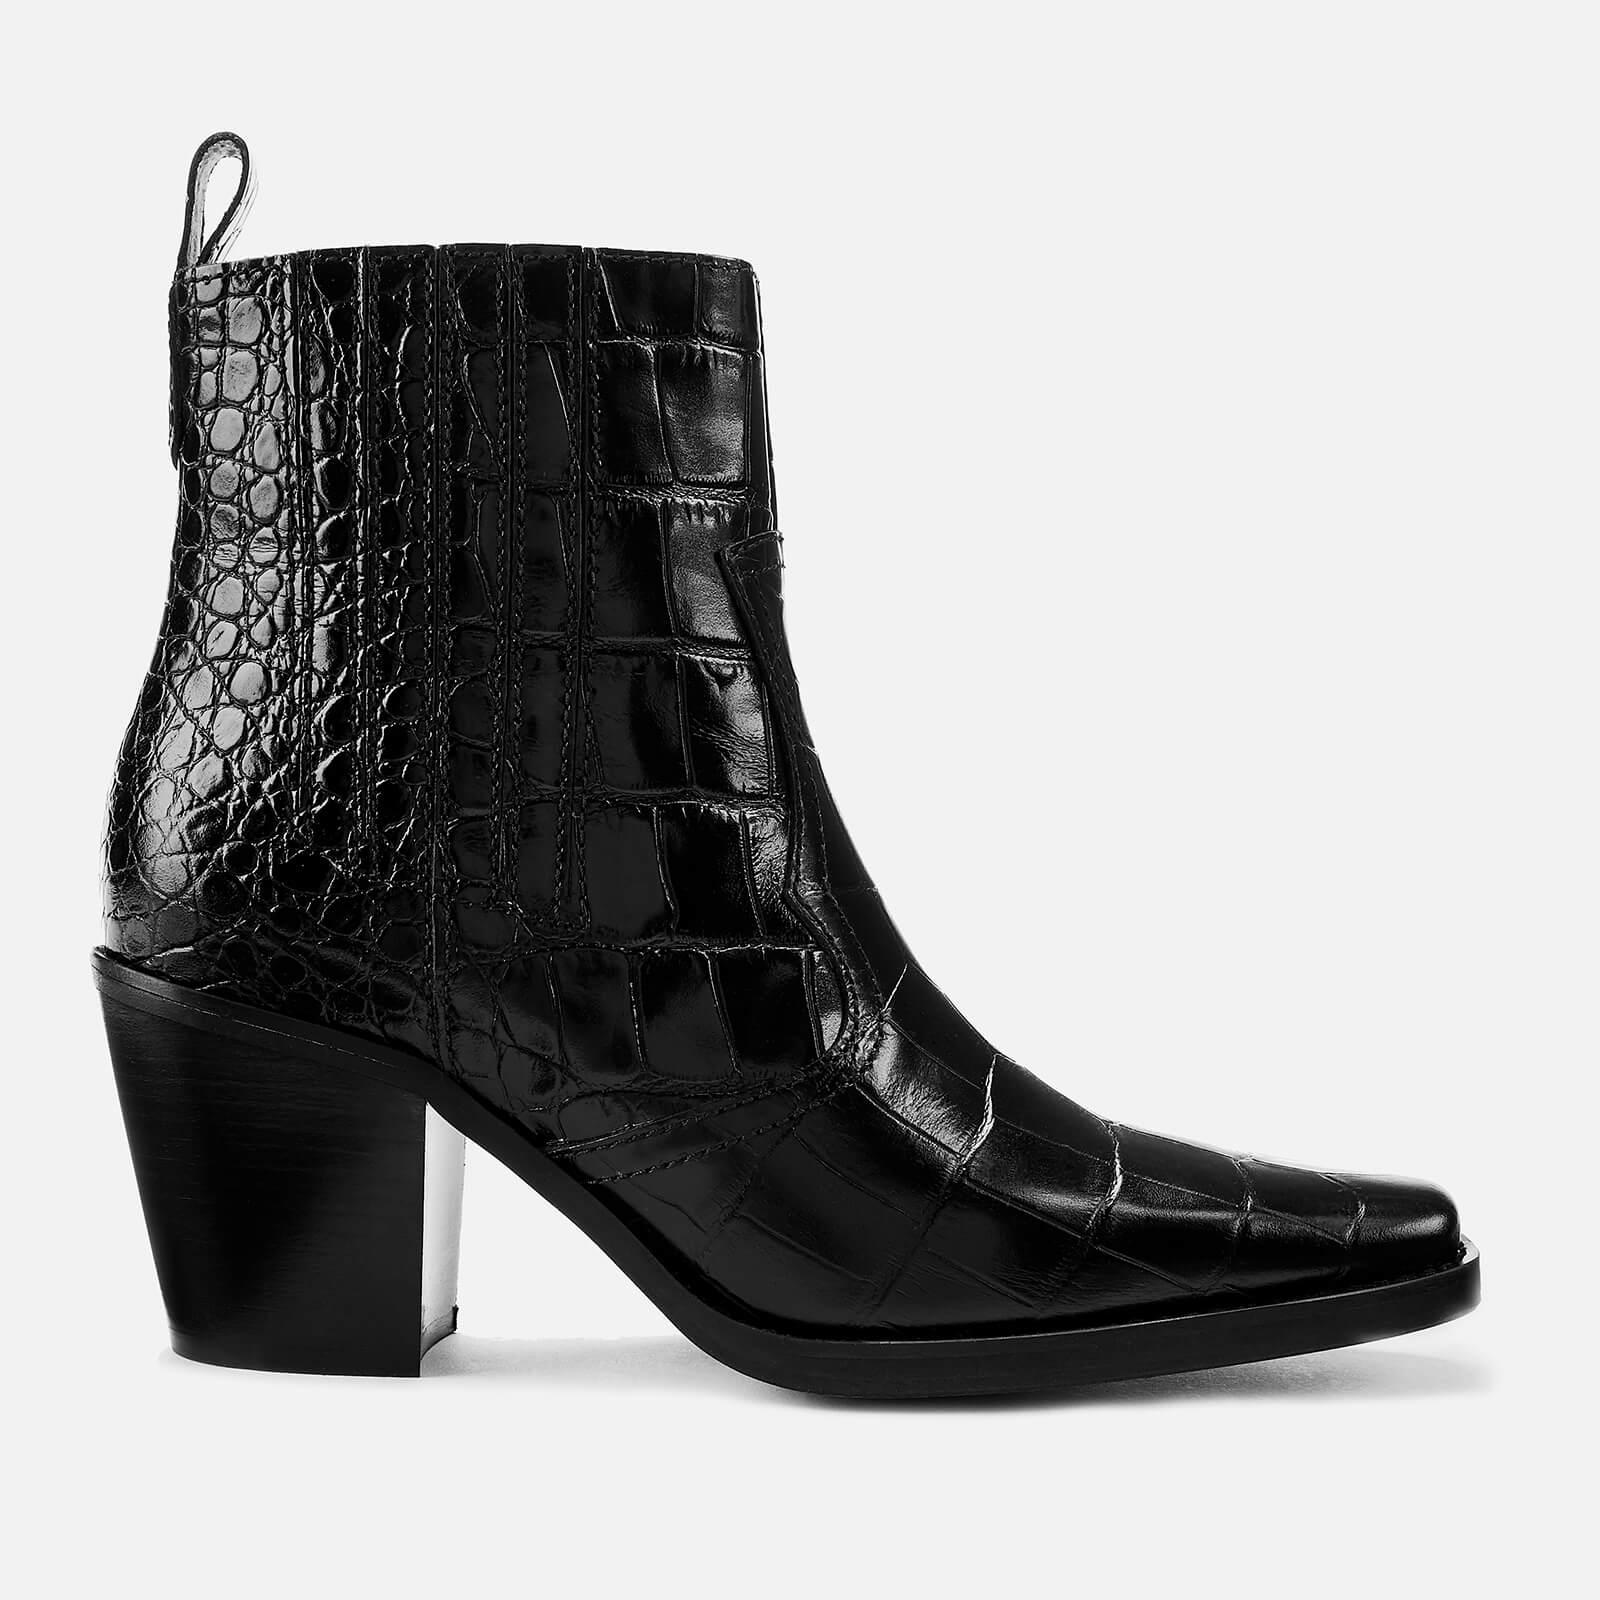 Ganni Leather Western Boots in Black - Lyst